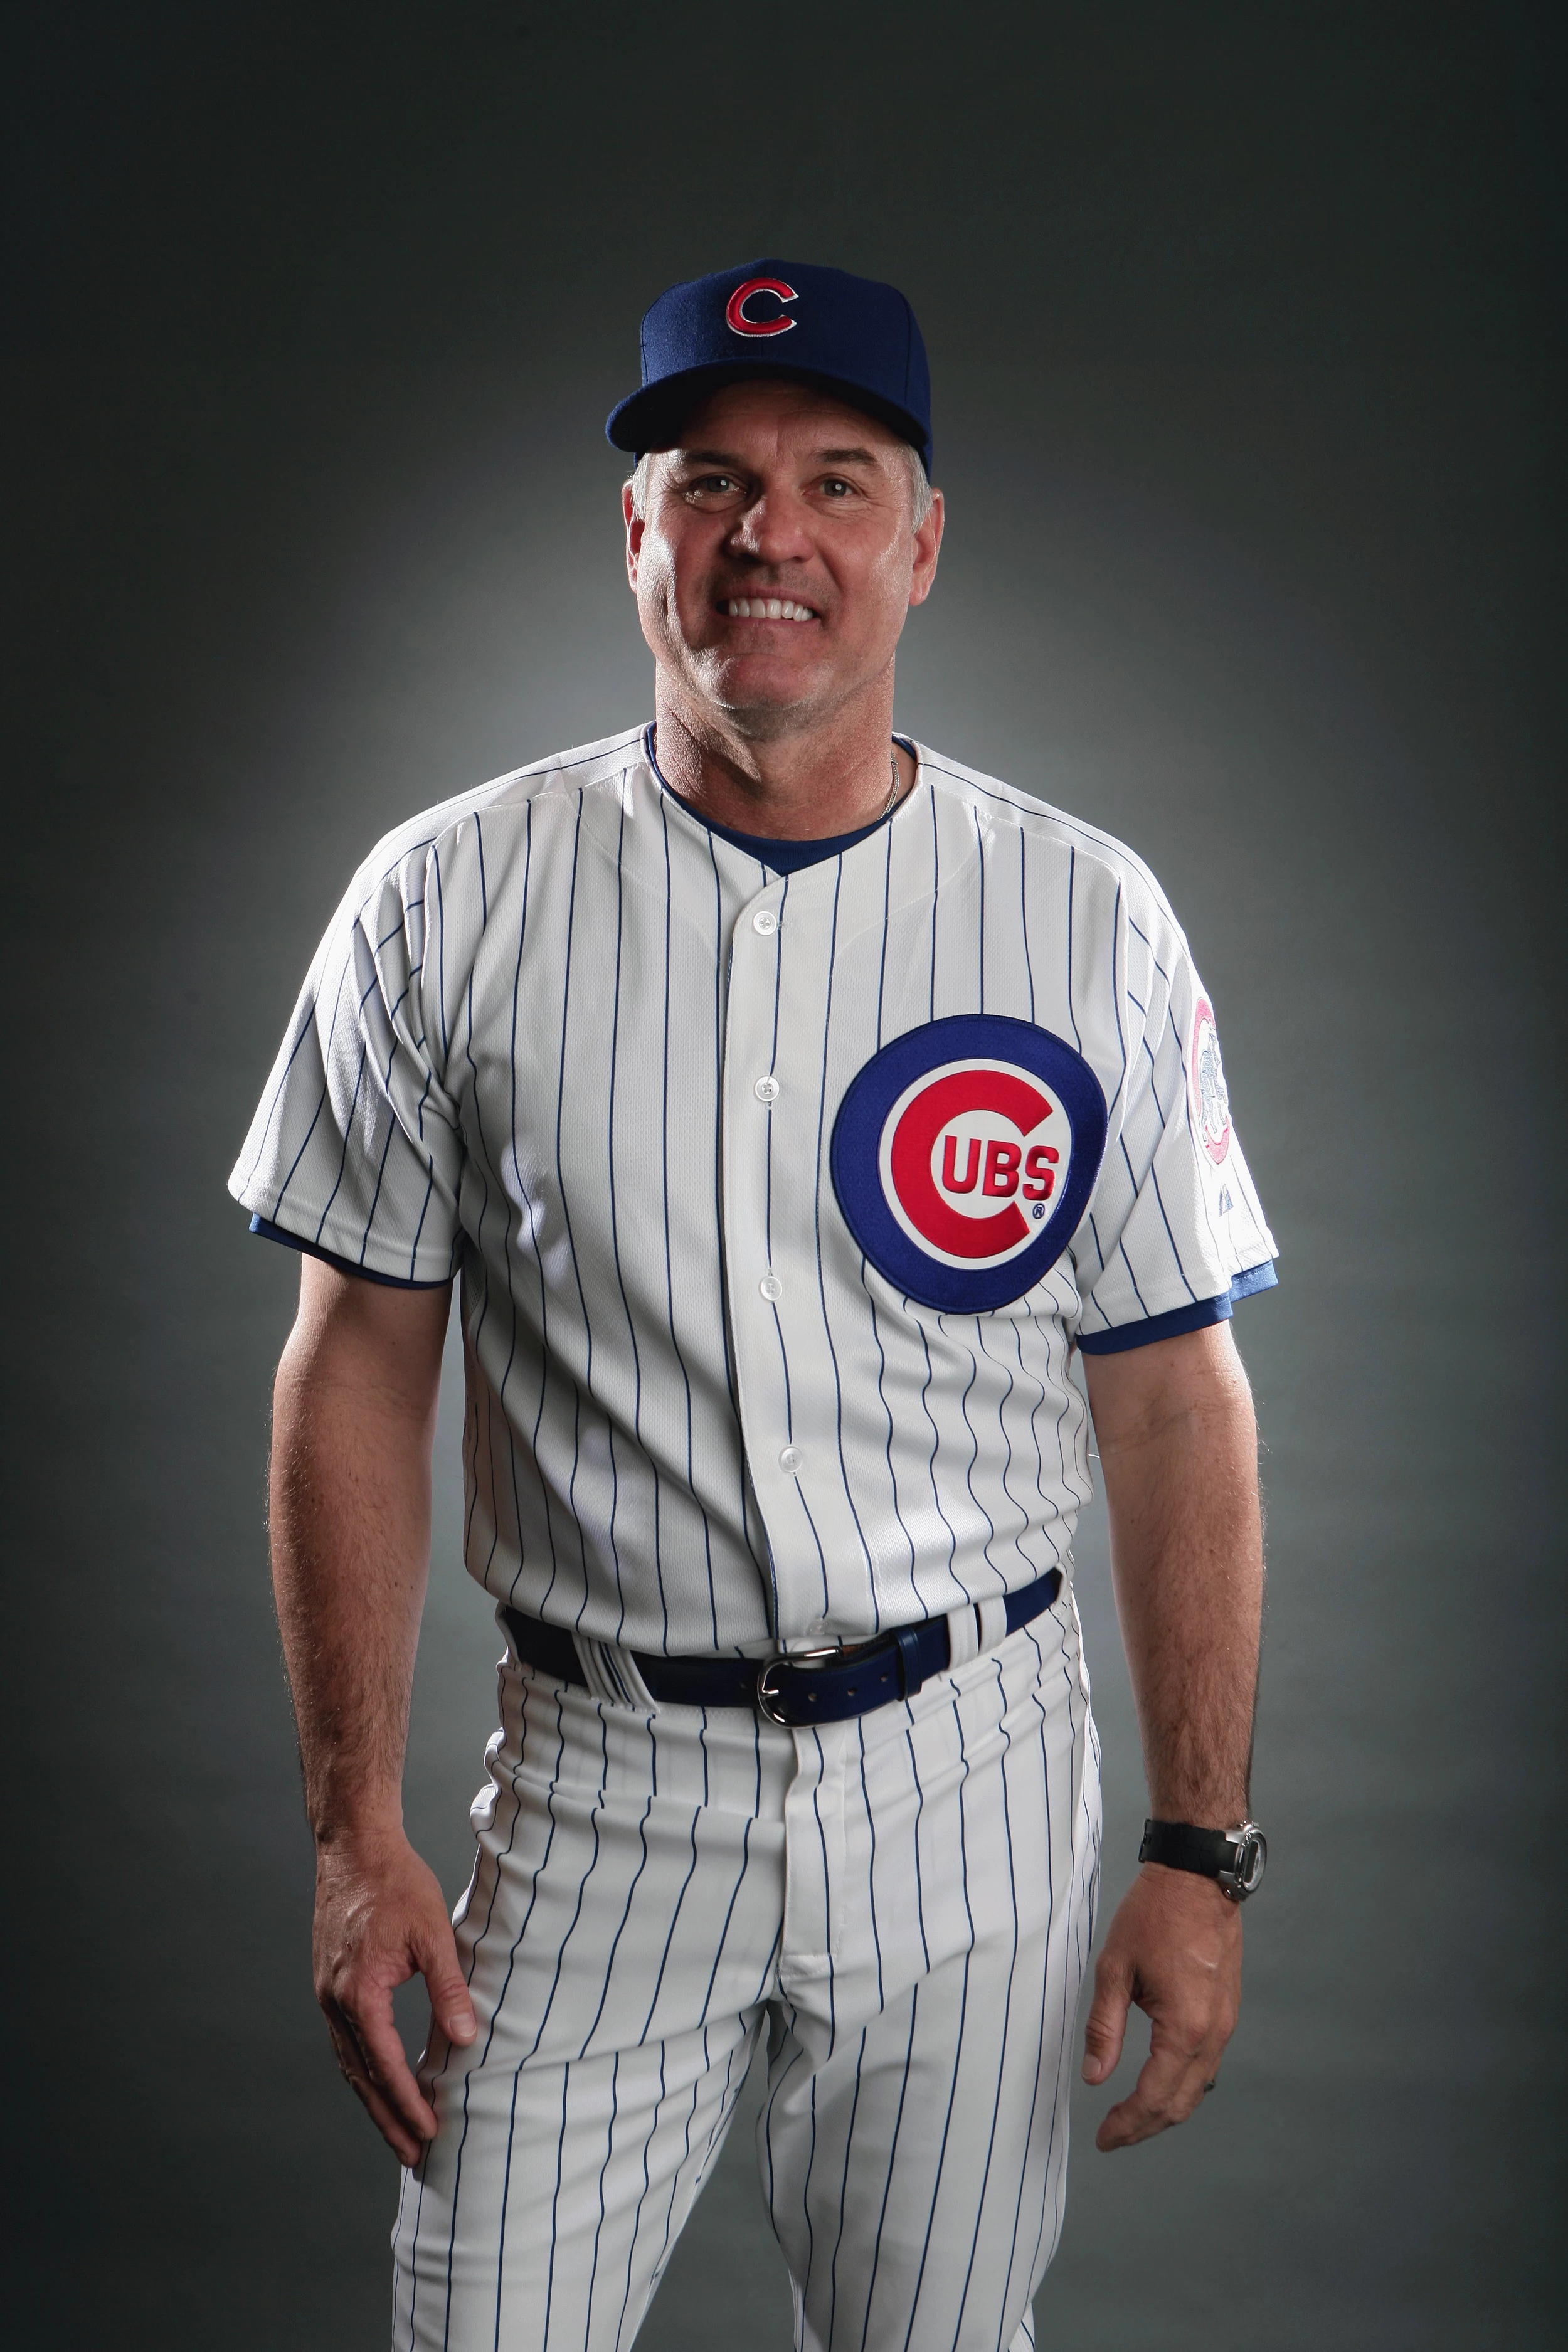 Buy Ryne Sandberg CHICAGO CUBS Photo Picture WRIGLEY Field Online